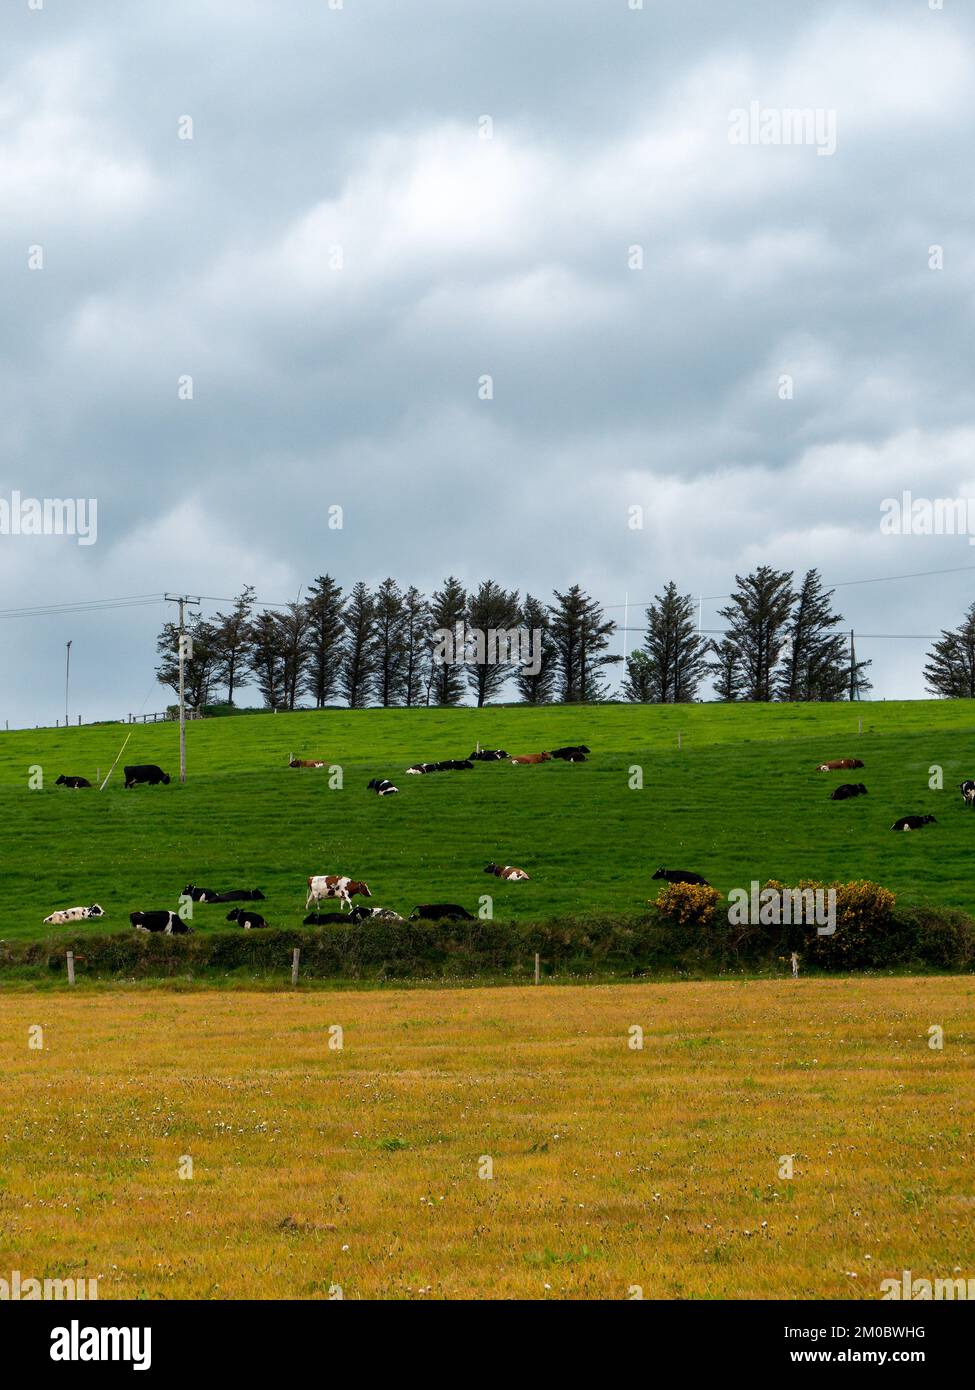 Village fields and pastures. Cows in a meadow. Agrarian landscape. Irish farmland. Green field, trees Stock Photo